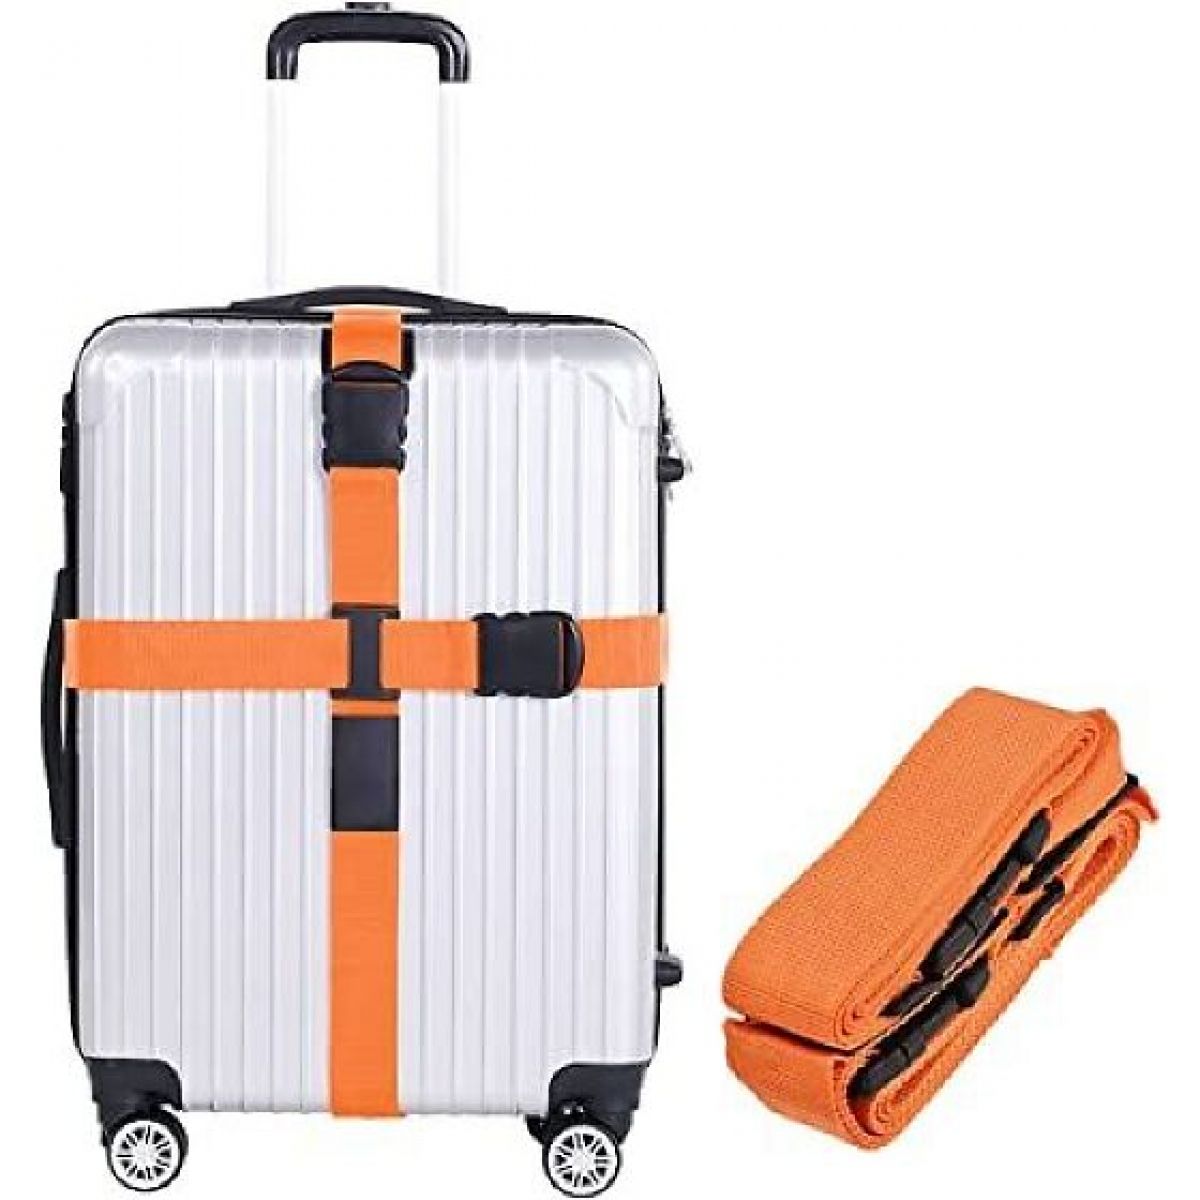 Luggage strap for a suitcase